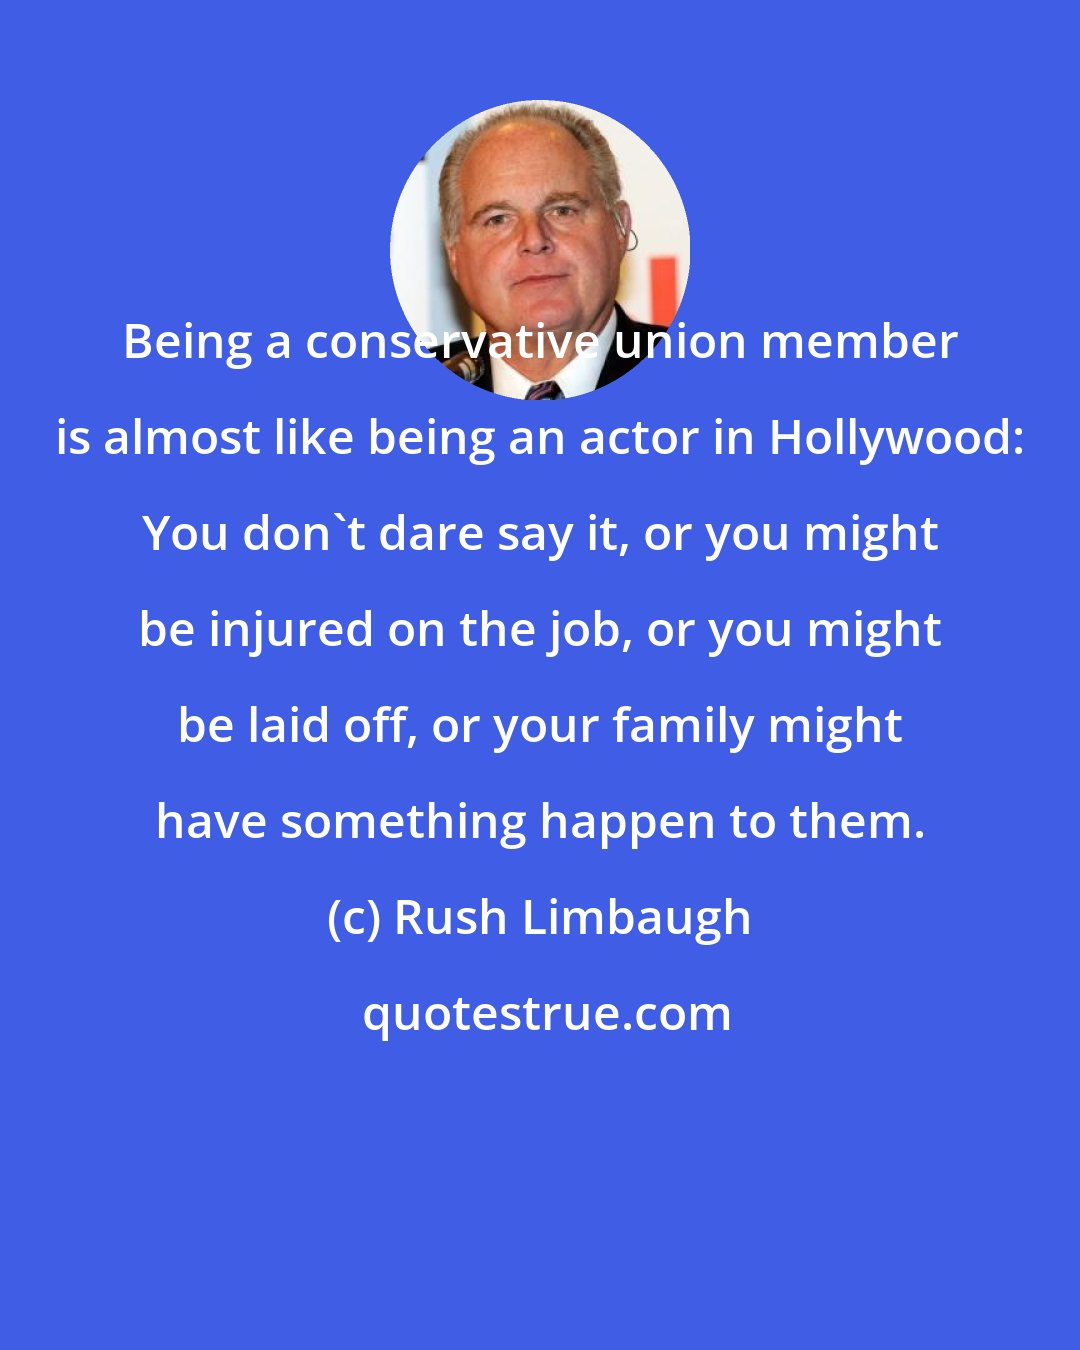 Rush Limbaugh: Being a conservative union member is almost like being an actor in Hollywood: You don't dare say it, or you might be injured on the job, or you might be laid off, or your family might have something happen to them.